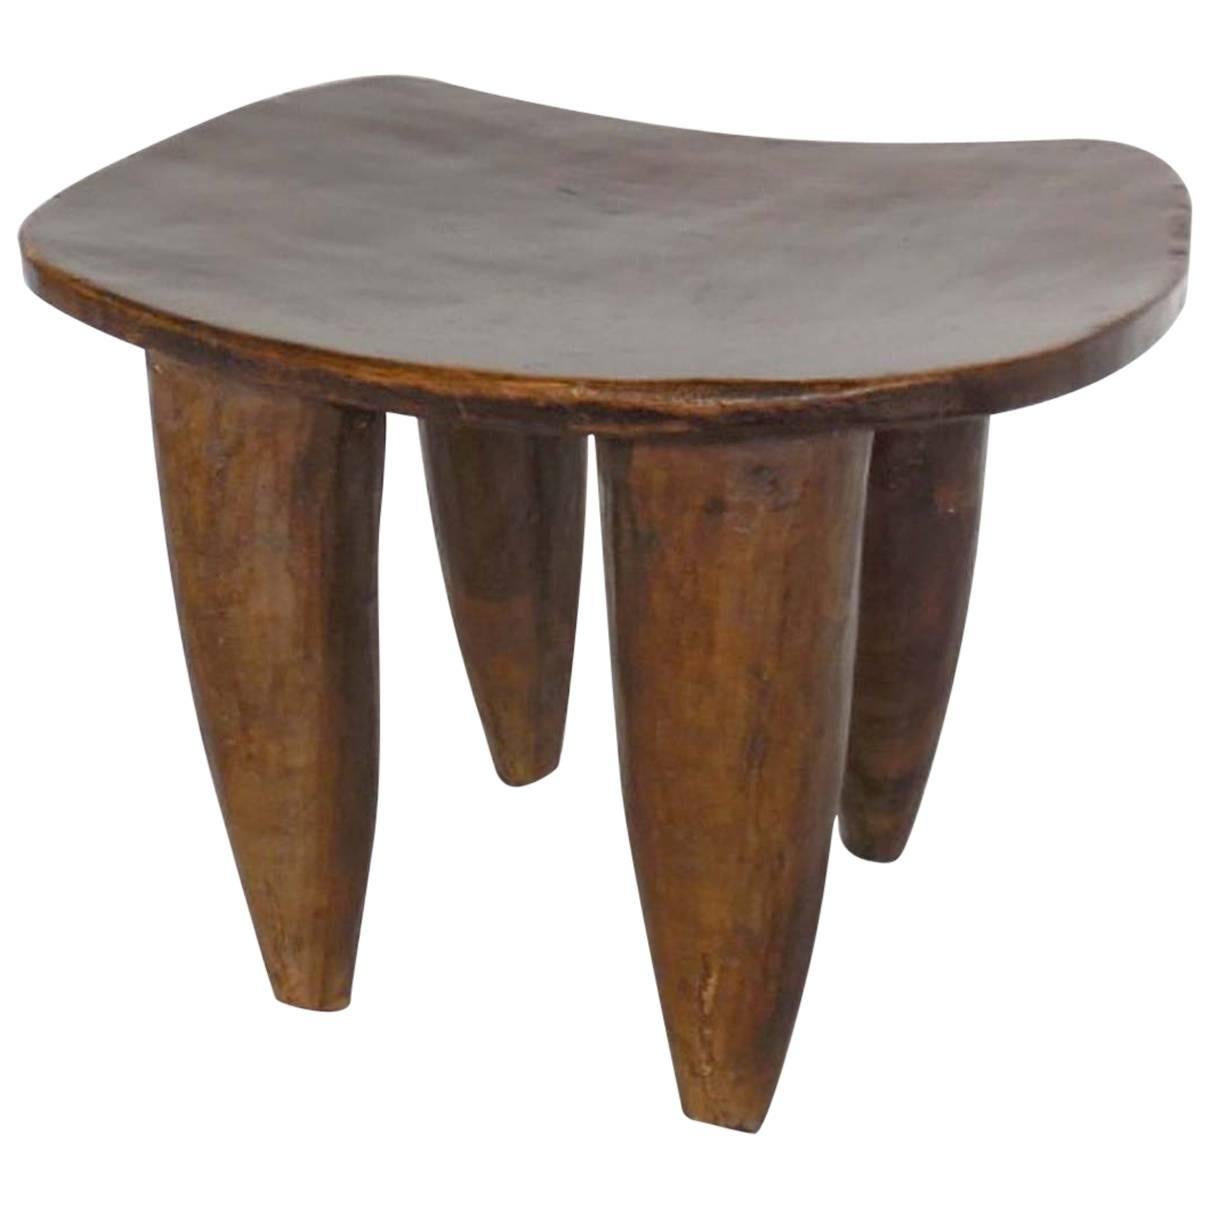 Carved Side Table or Stools from Mali